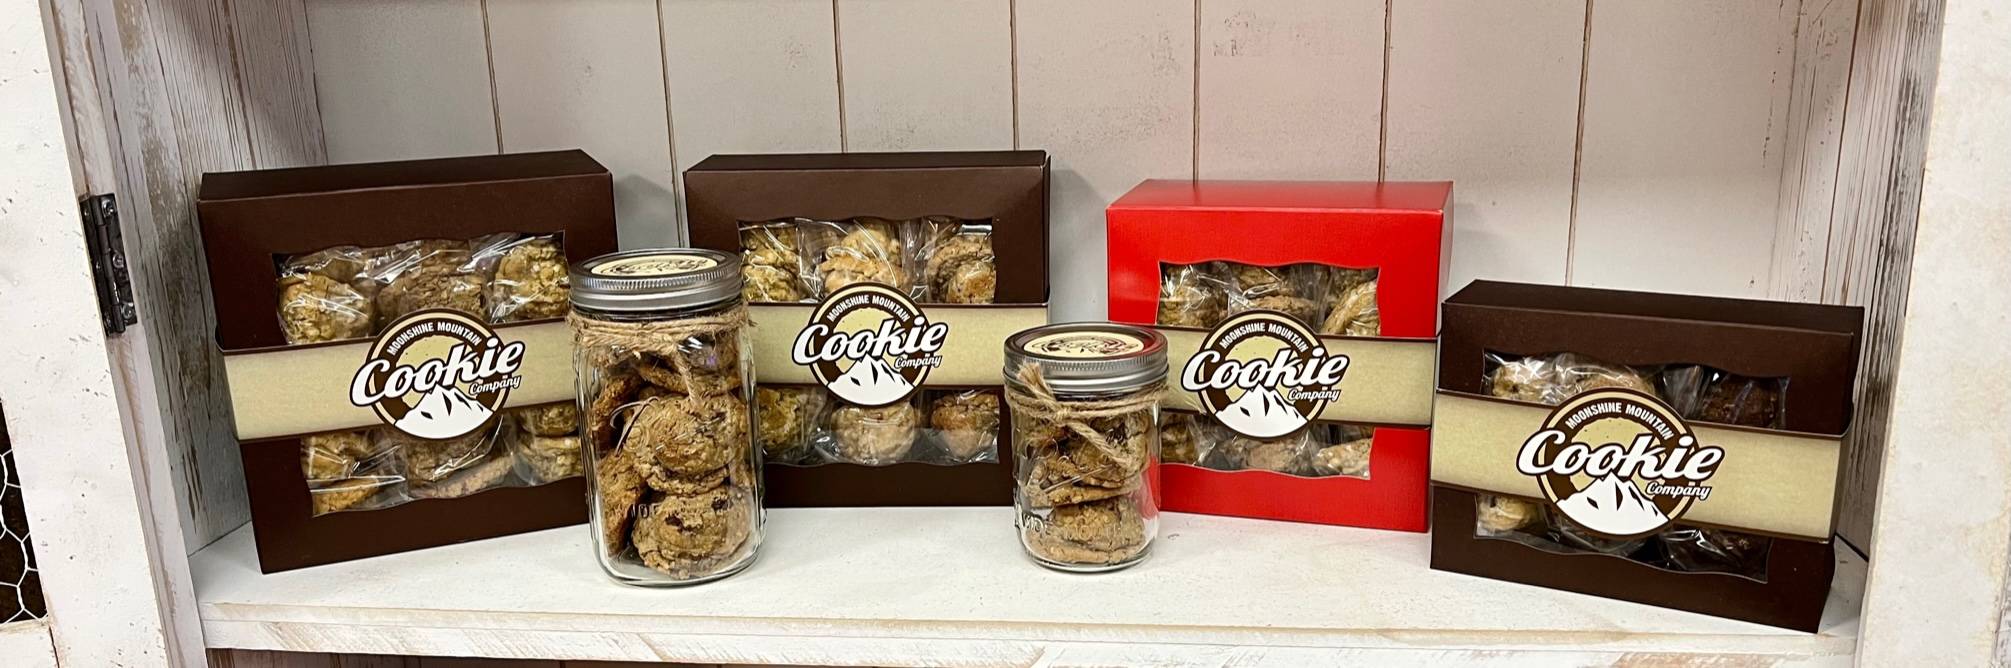 Corporate Cookie Gifts from Moonshine Mountain Cookies